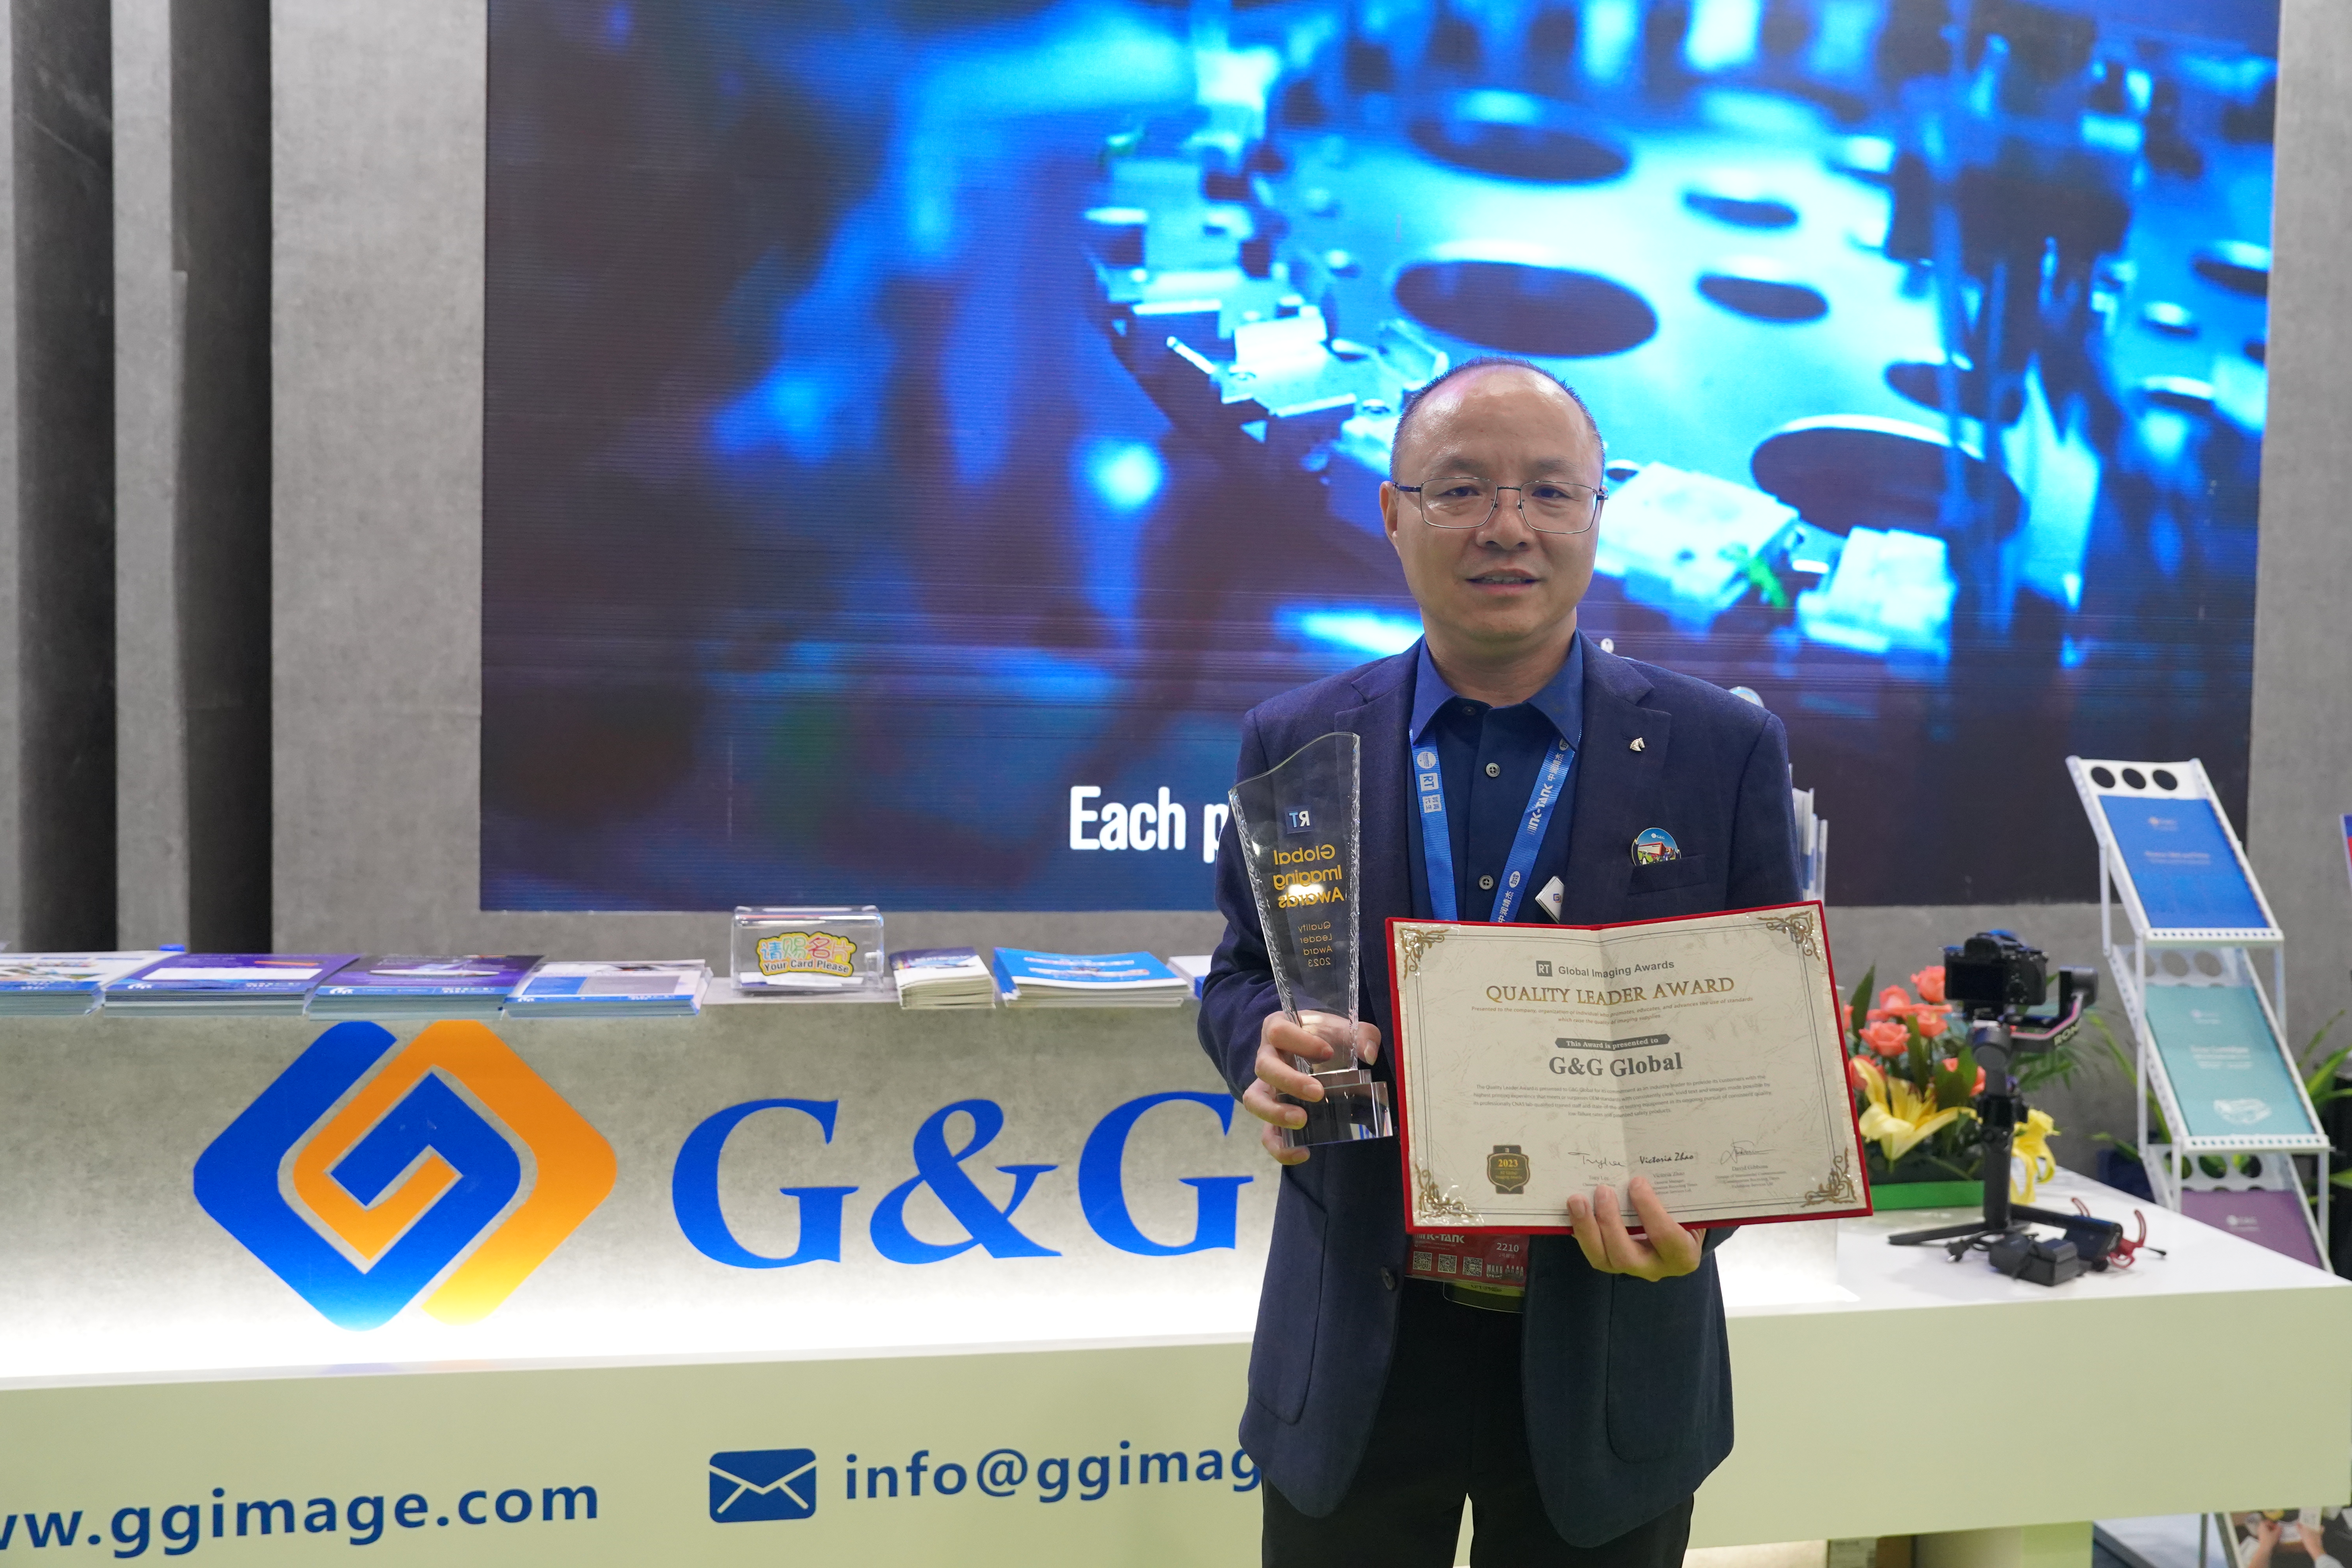 G&G Honored as Global Quality Leader for Imaging Supplies